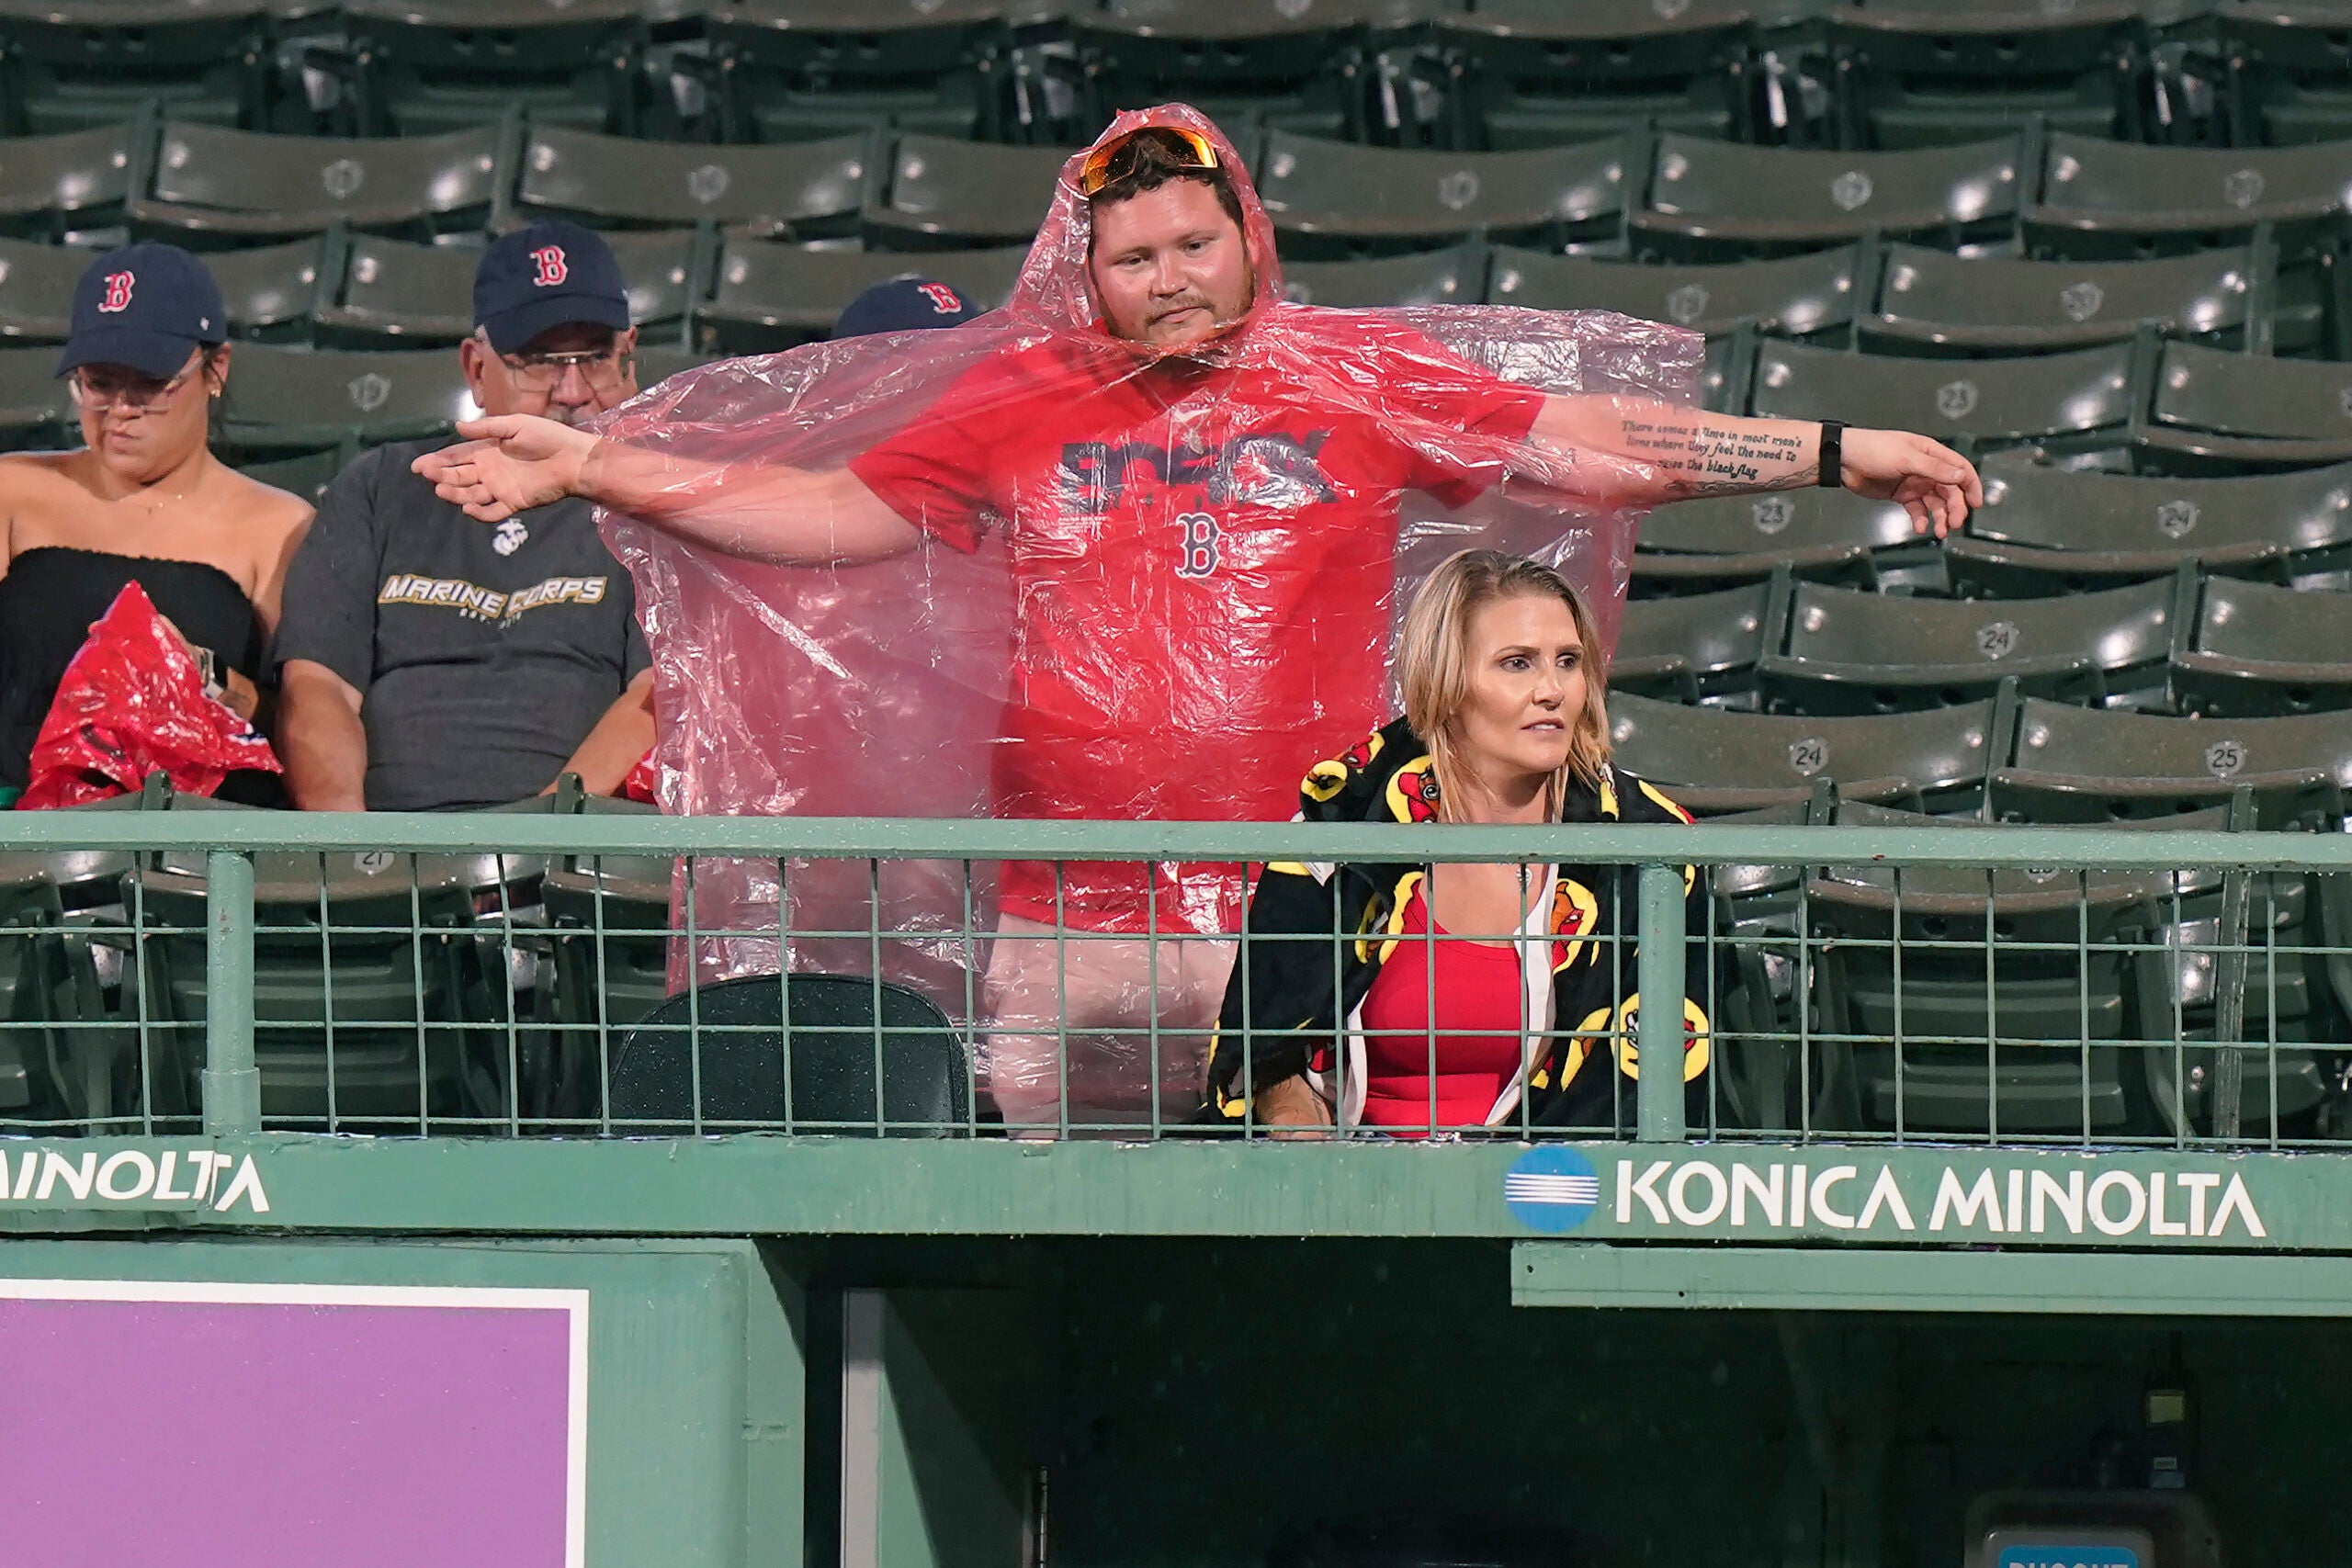 A Red Sox fan stretches as he puts on a red poncho during a rain delay .